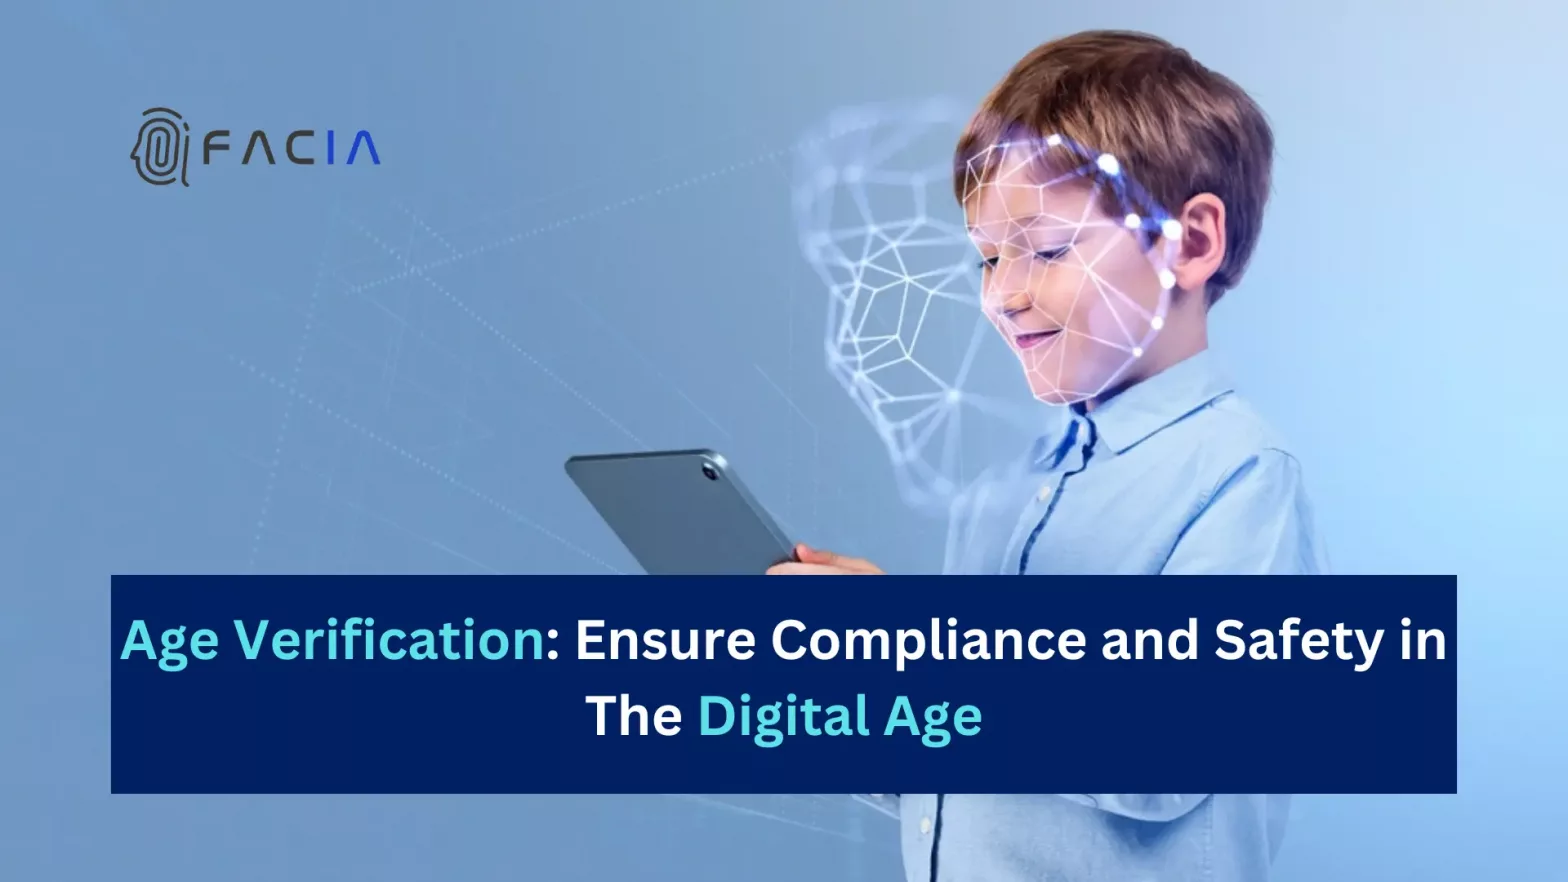 Age Verification System: Compliance and Safety in Digital Era